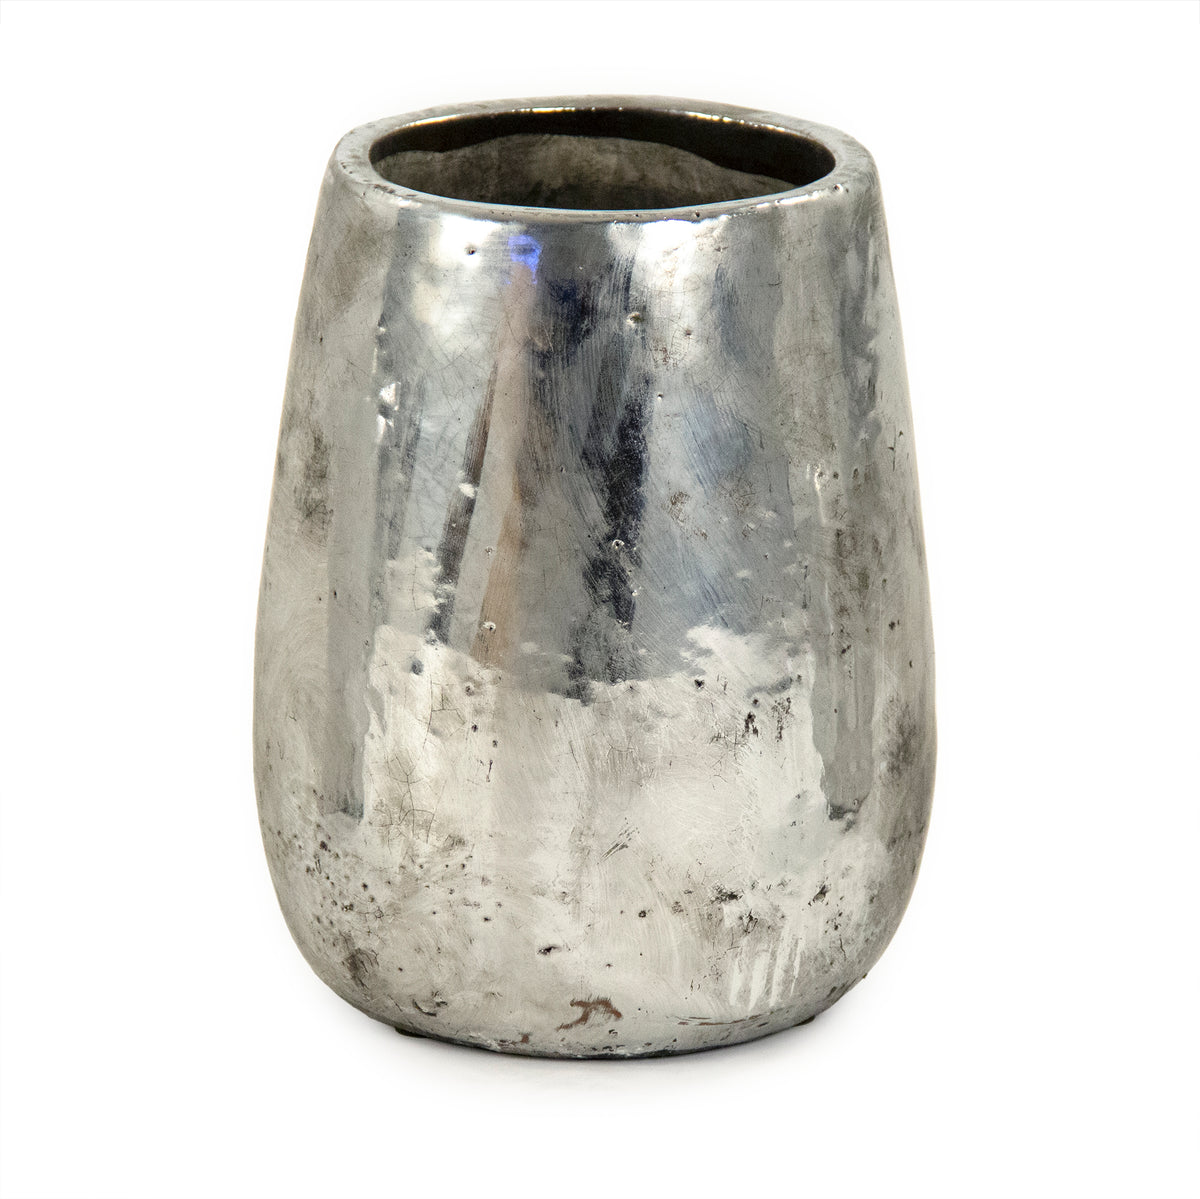 Distressed Metallic Silver Vase (9344L A840) by Zentique